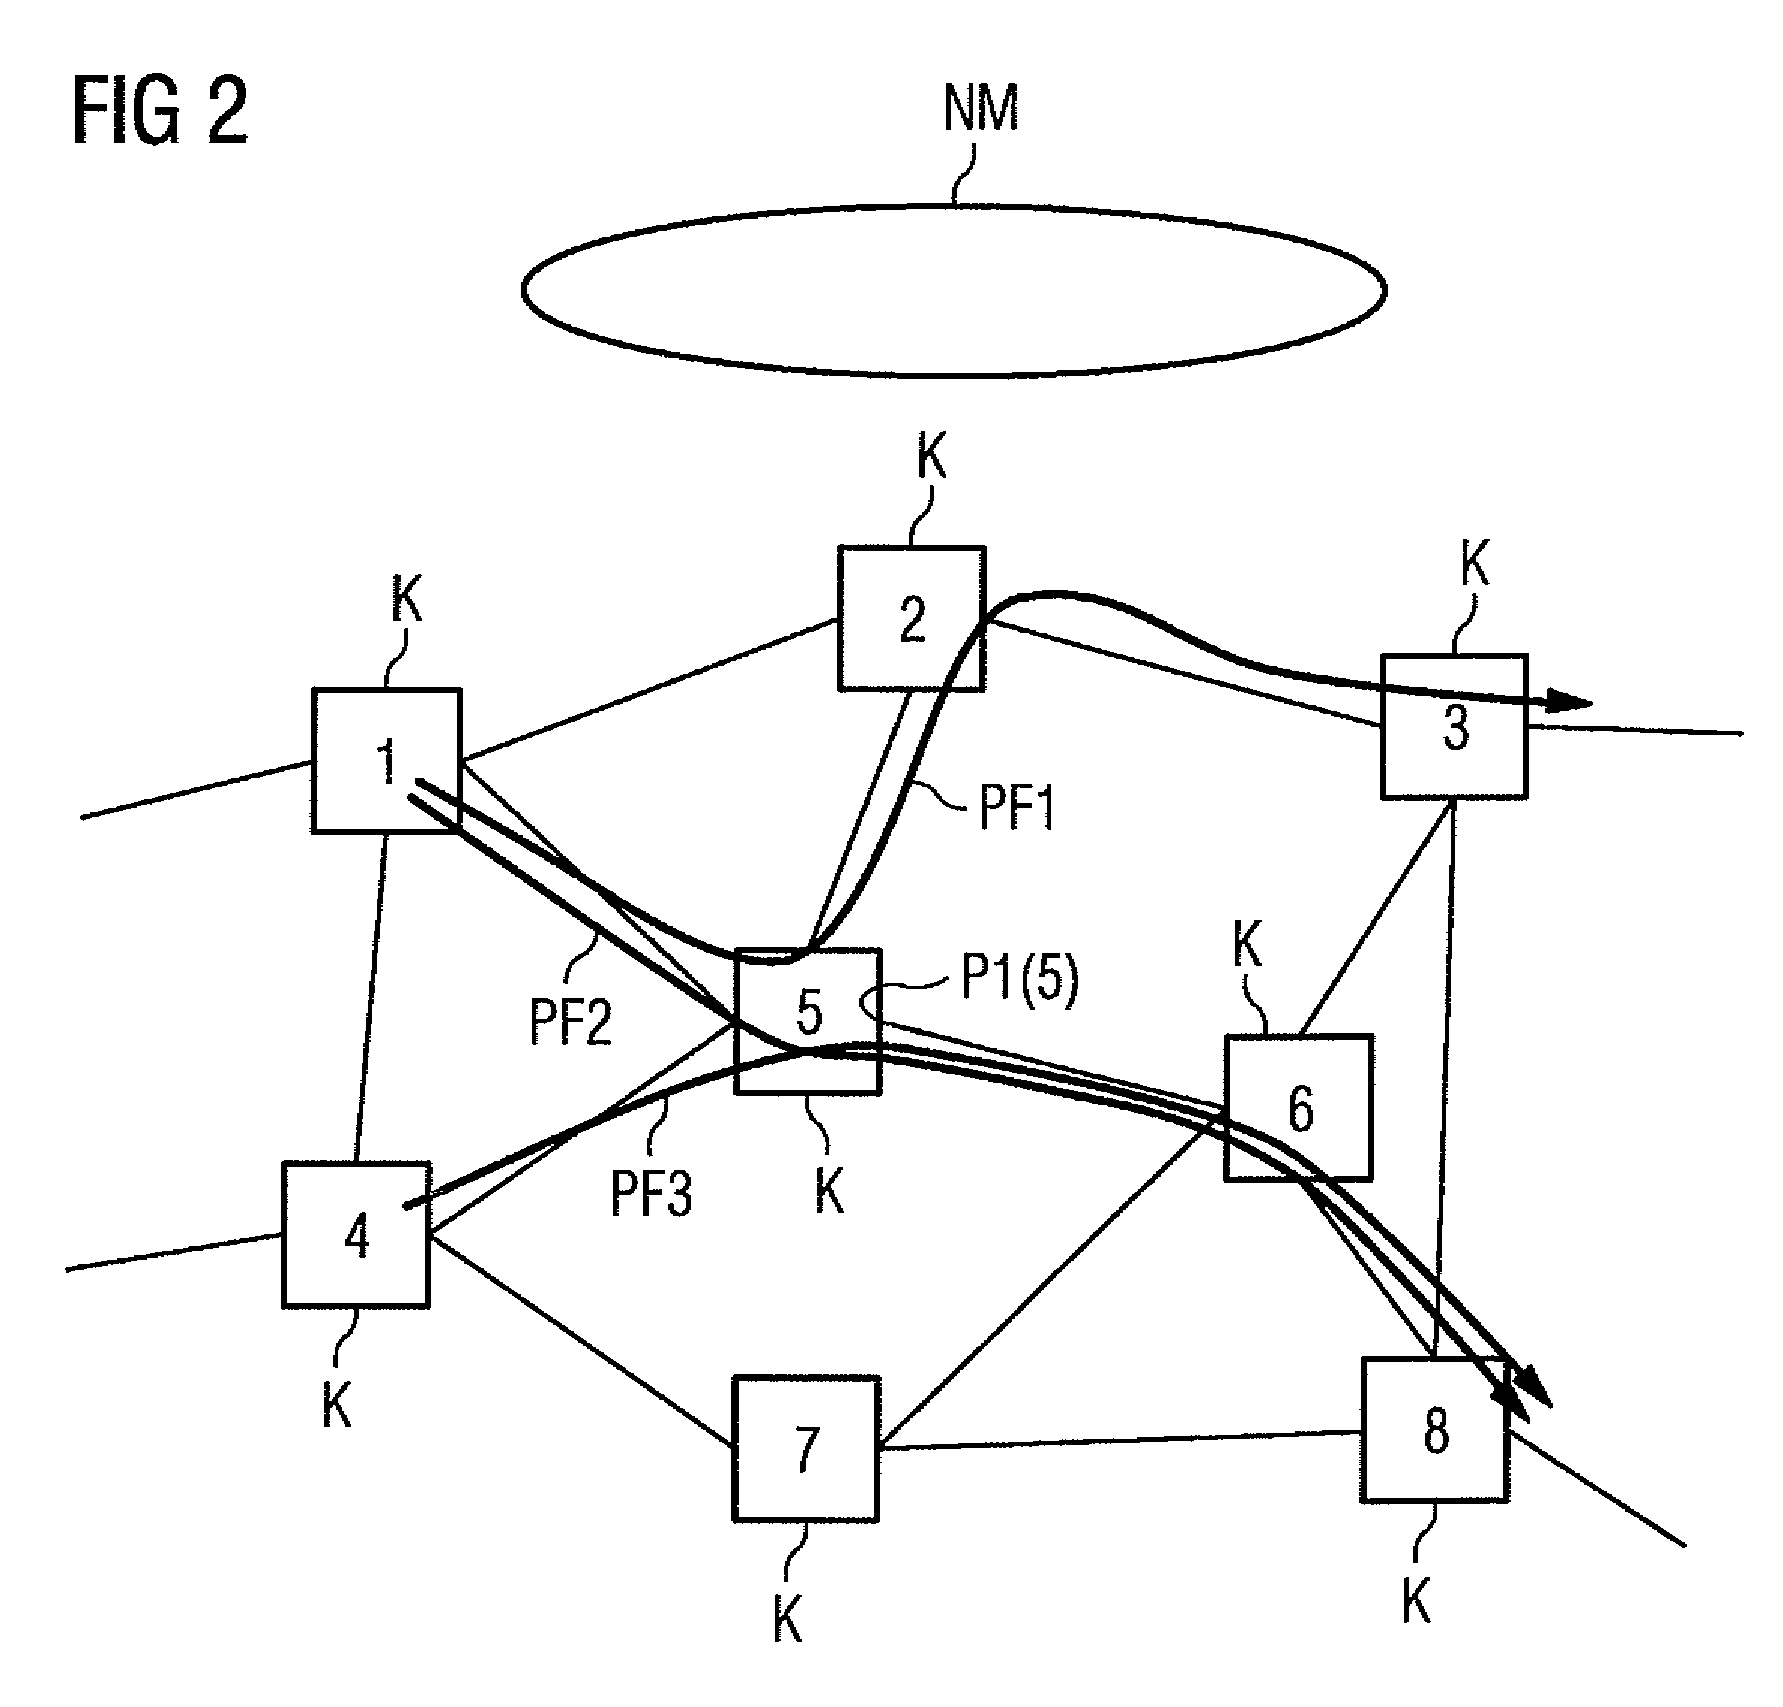 Method for improving the quality of data transmission in a packet-based communication network